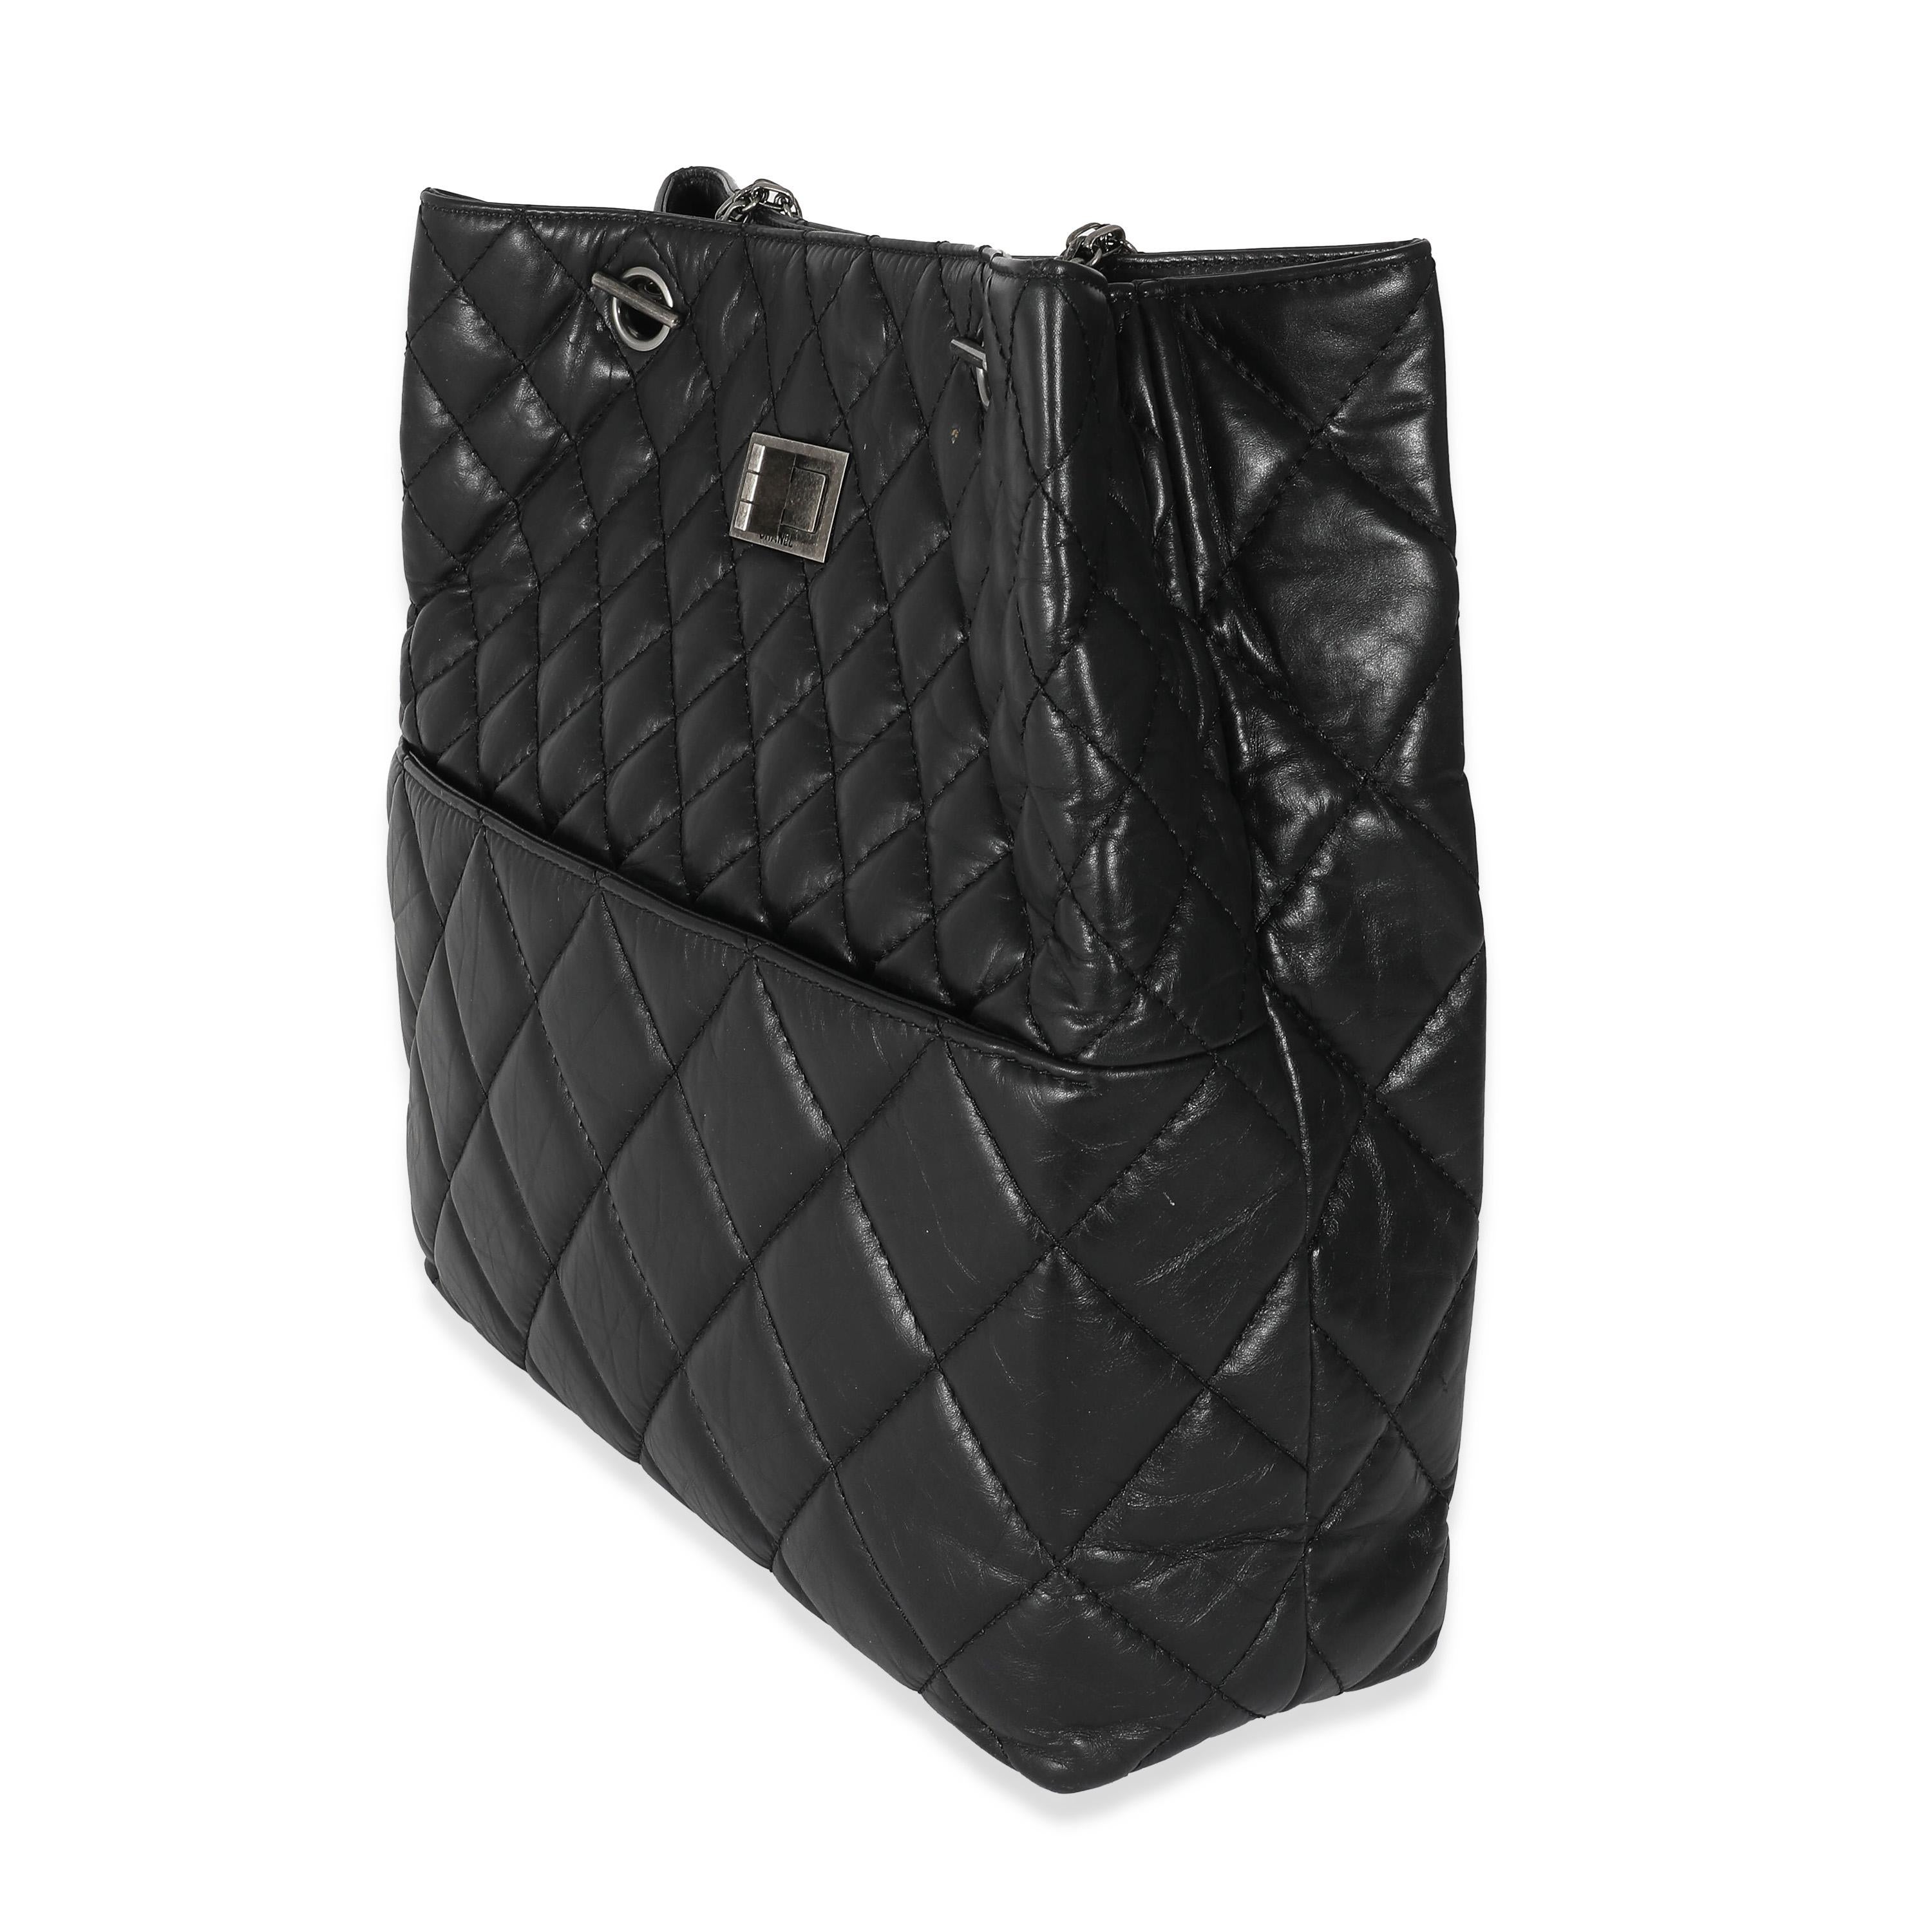 Chanel Black Calfskin Tall 2.55 Reissue Tote In Excellent Condition For Sale In New York, NY